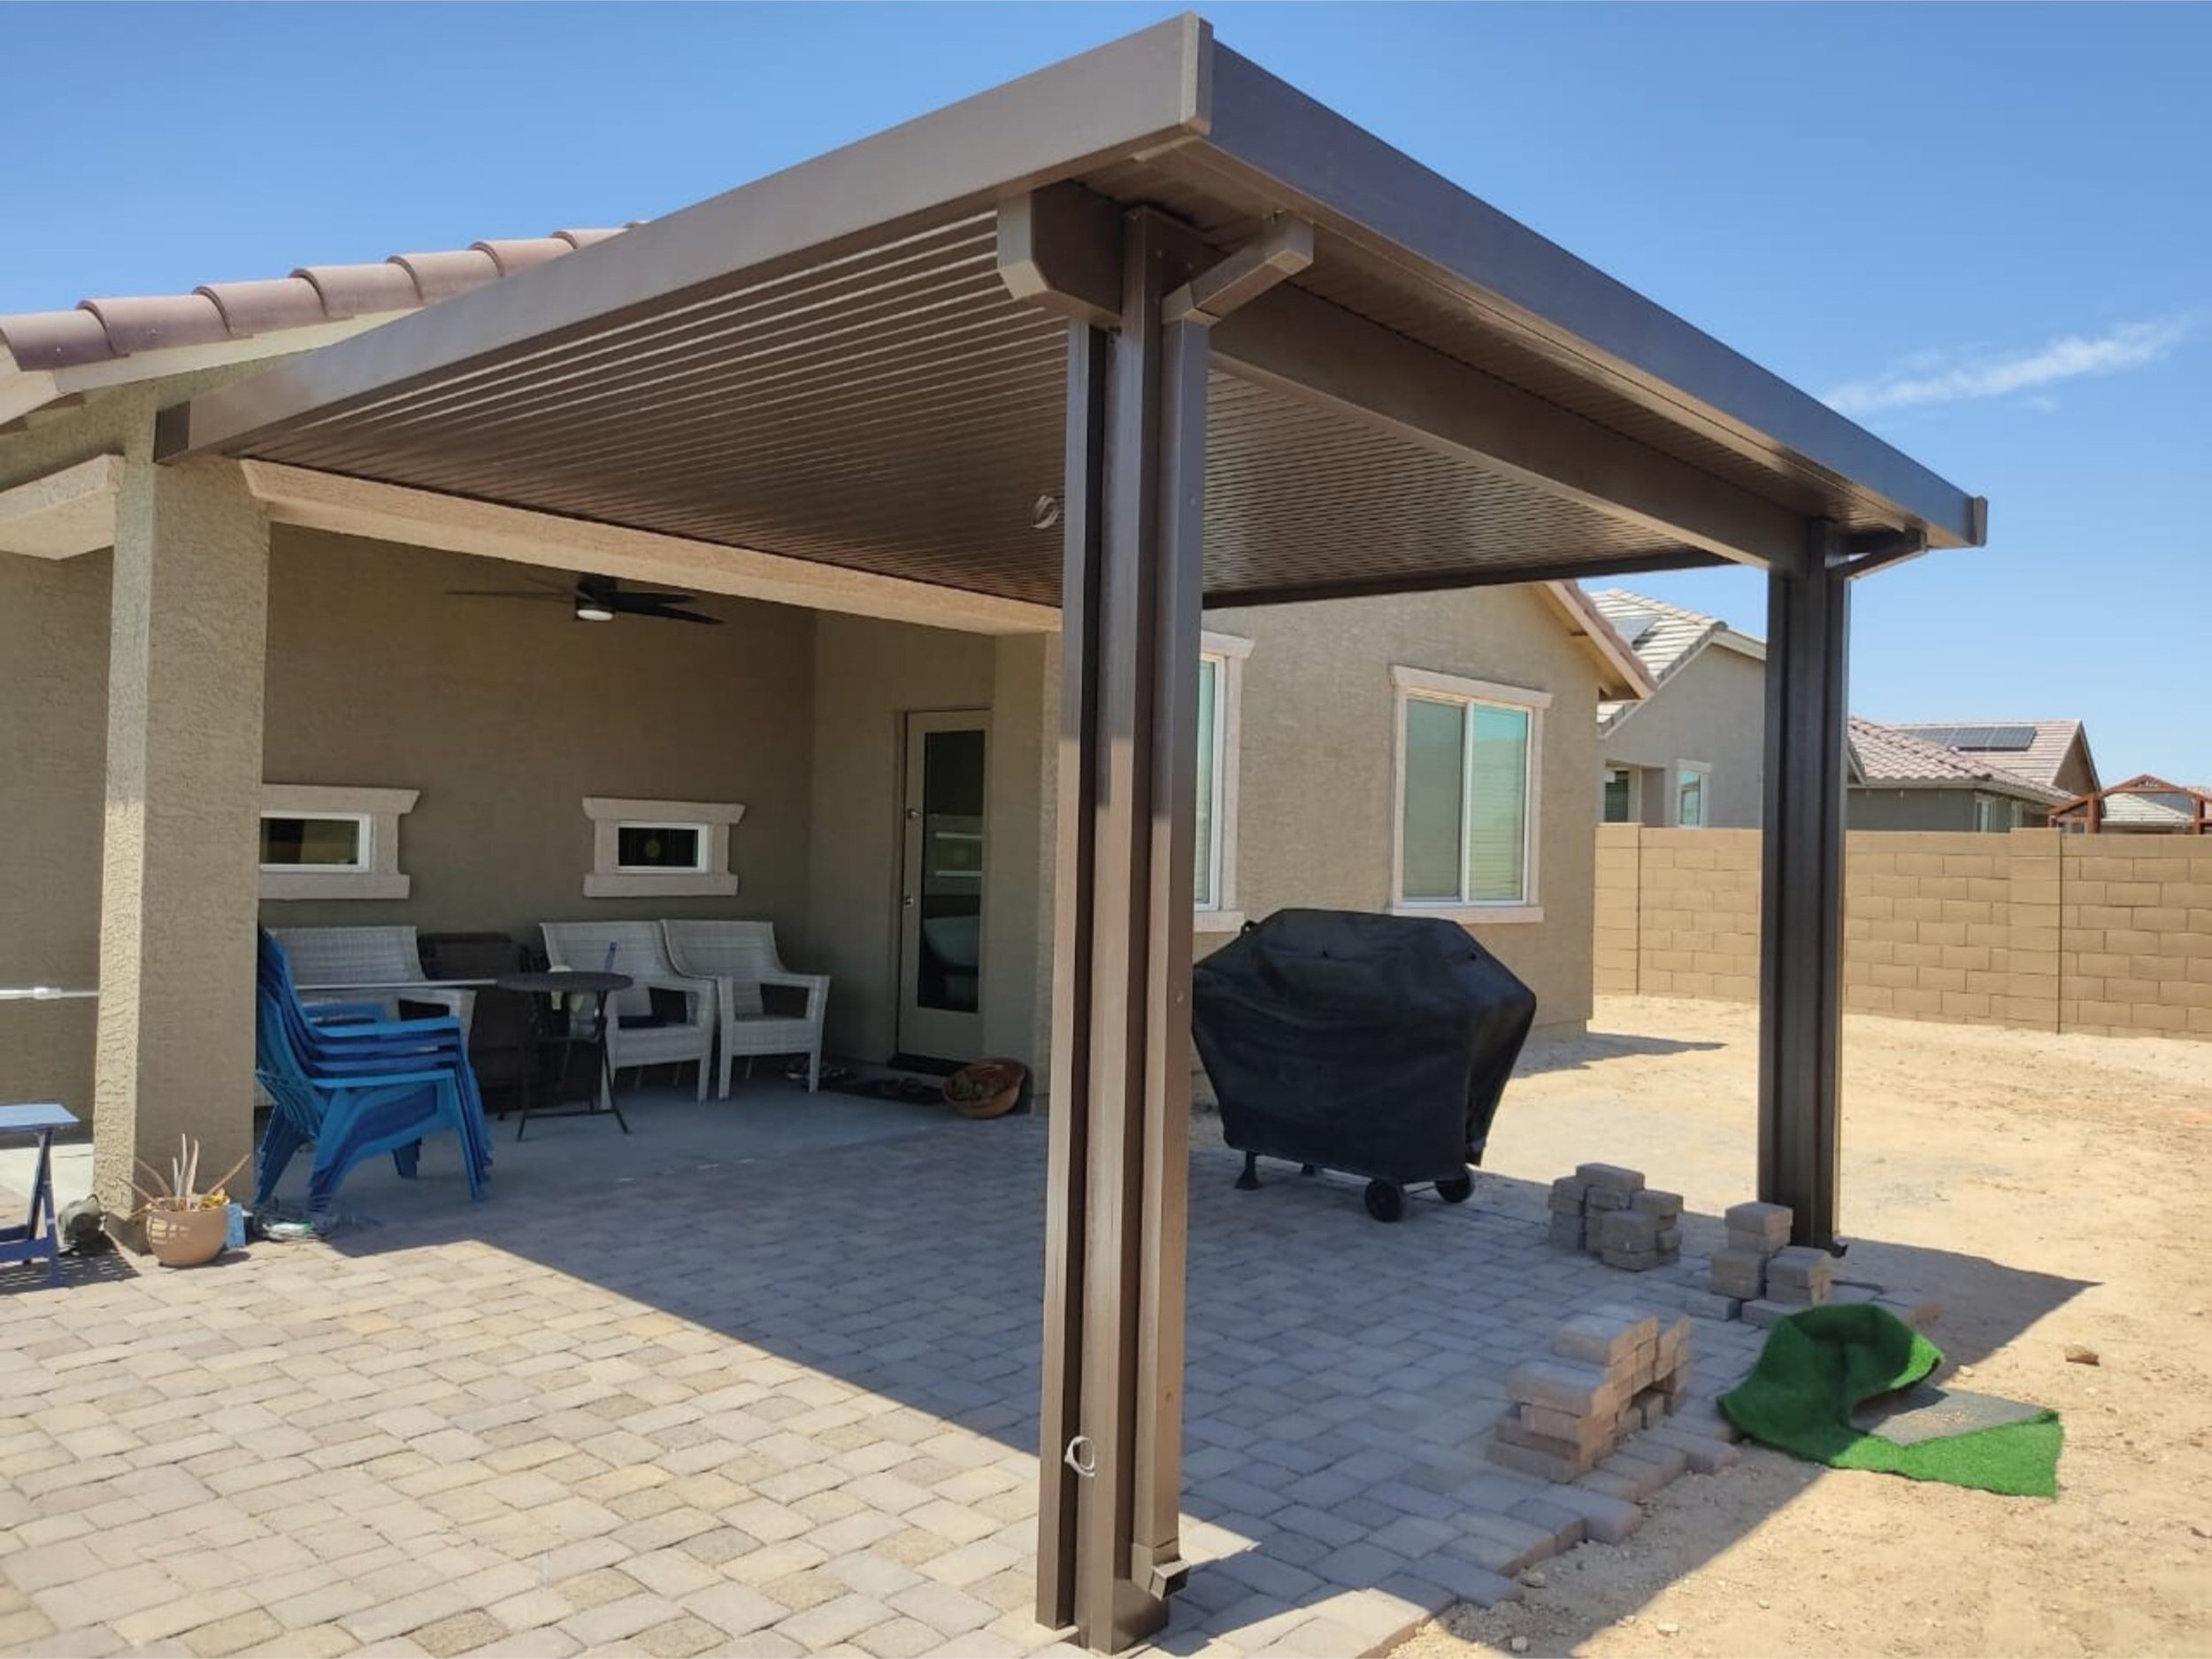 Insulated Laminated Roof Panel Patio Cover, Outshine Patio Cover, Tempe